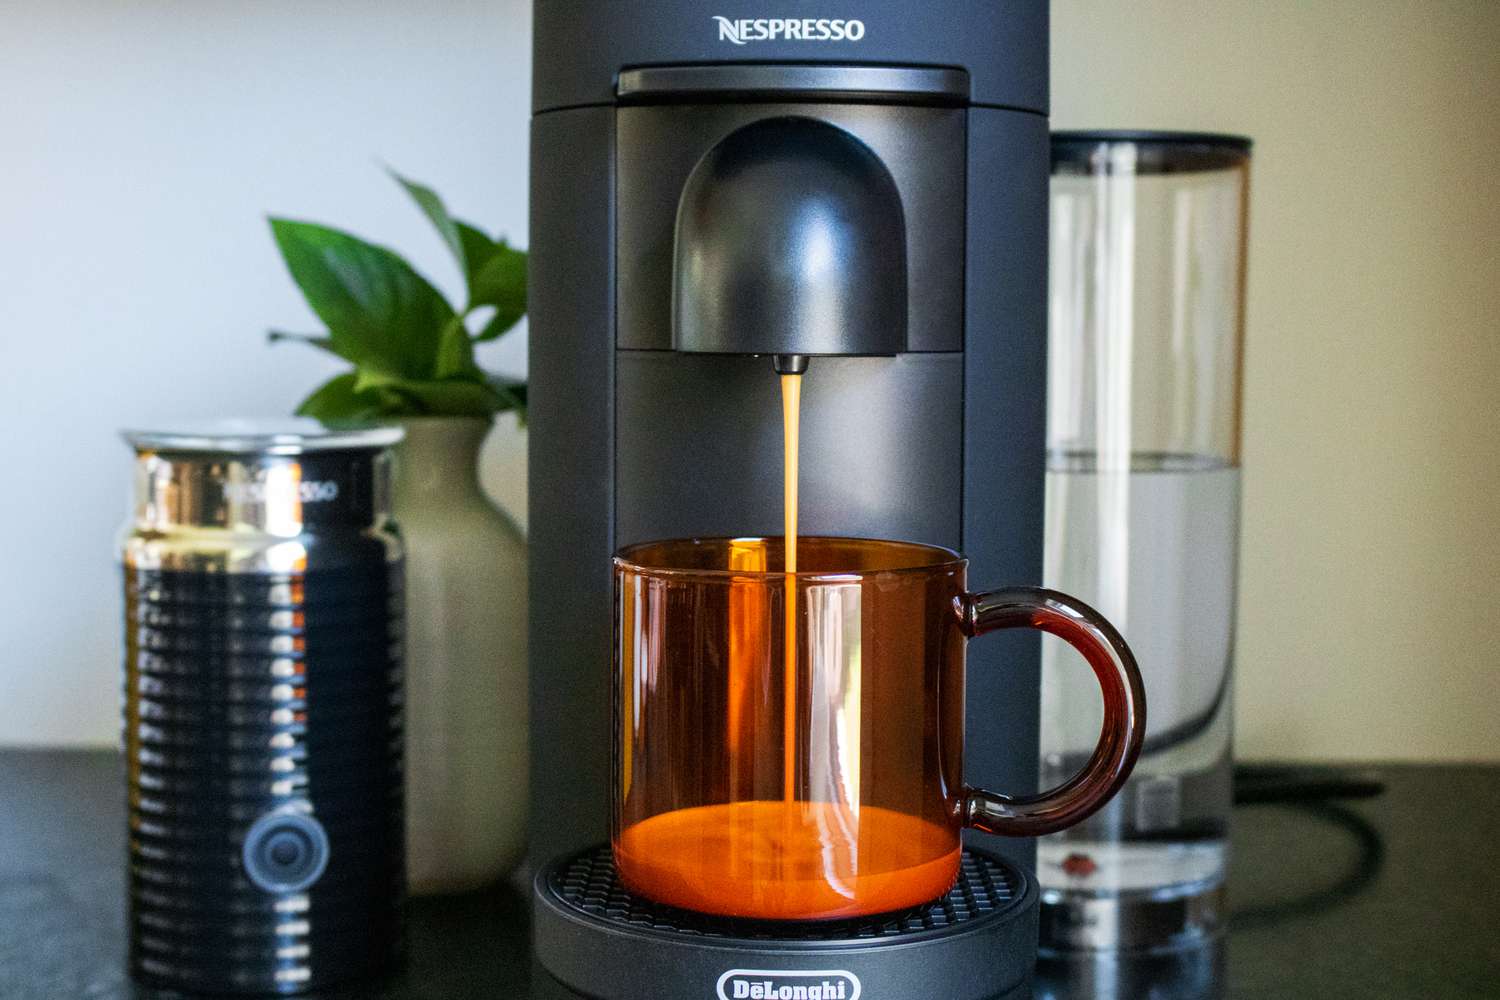 What Exactly Is A Nespresso Machine?